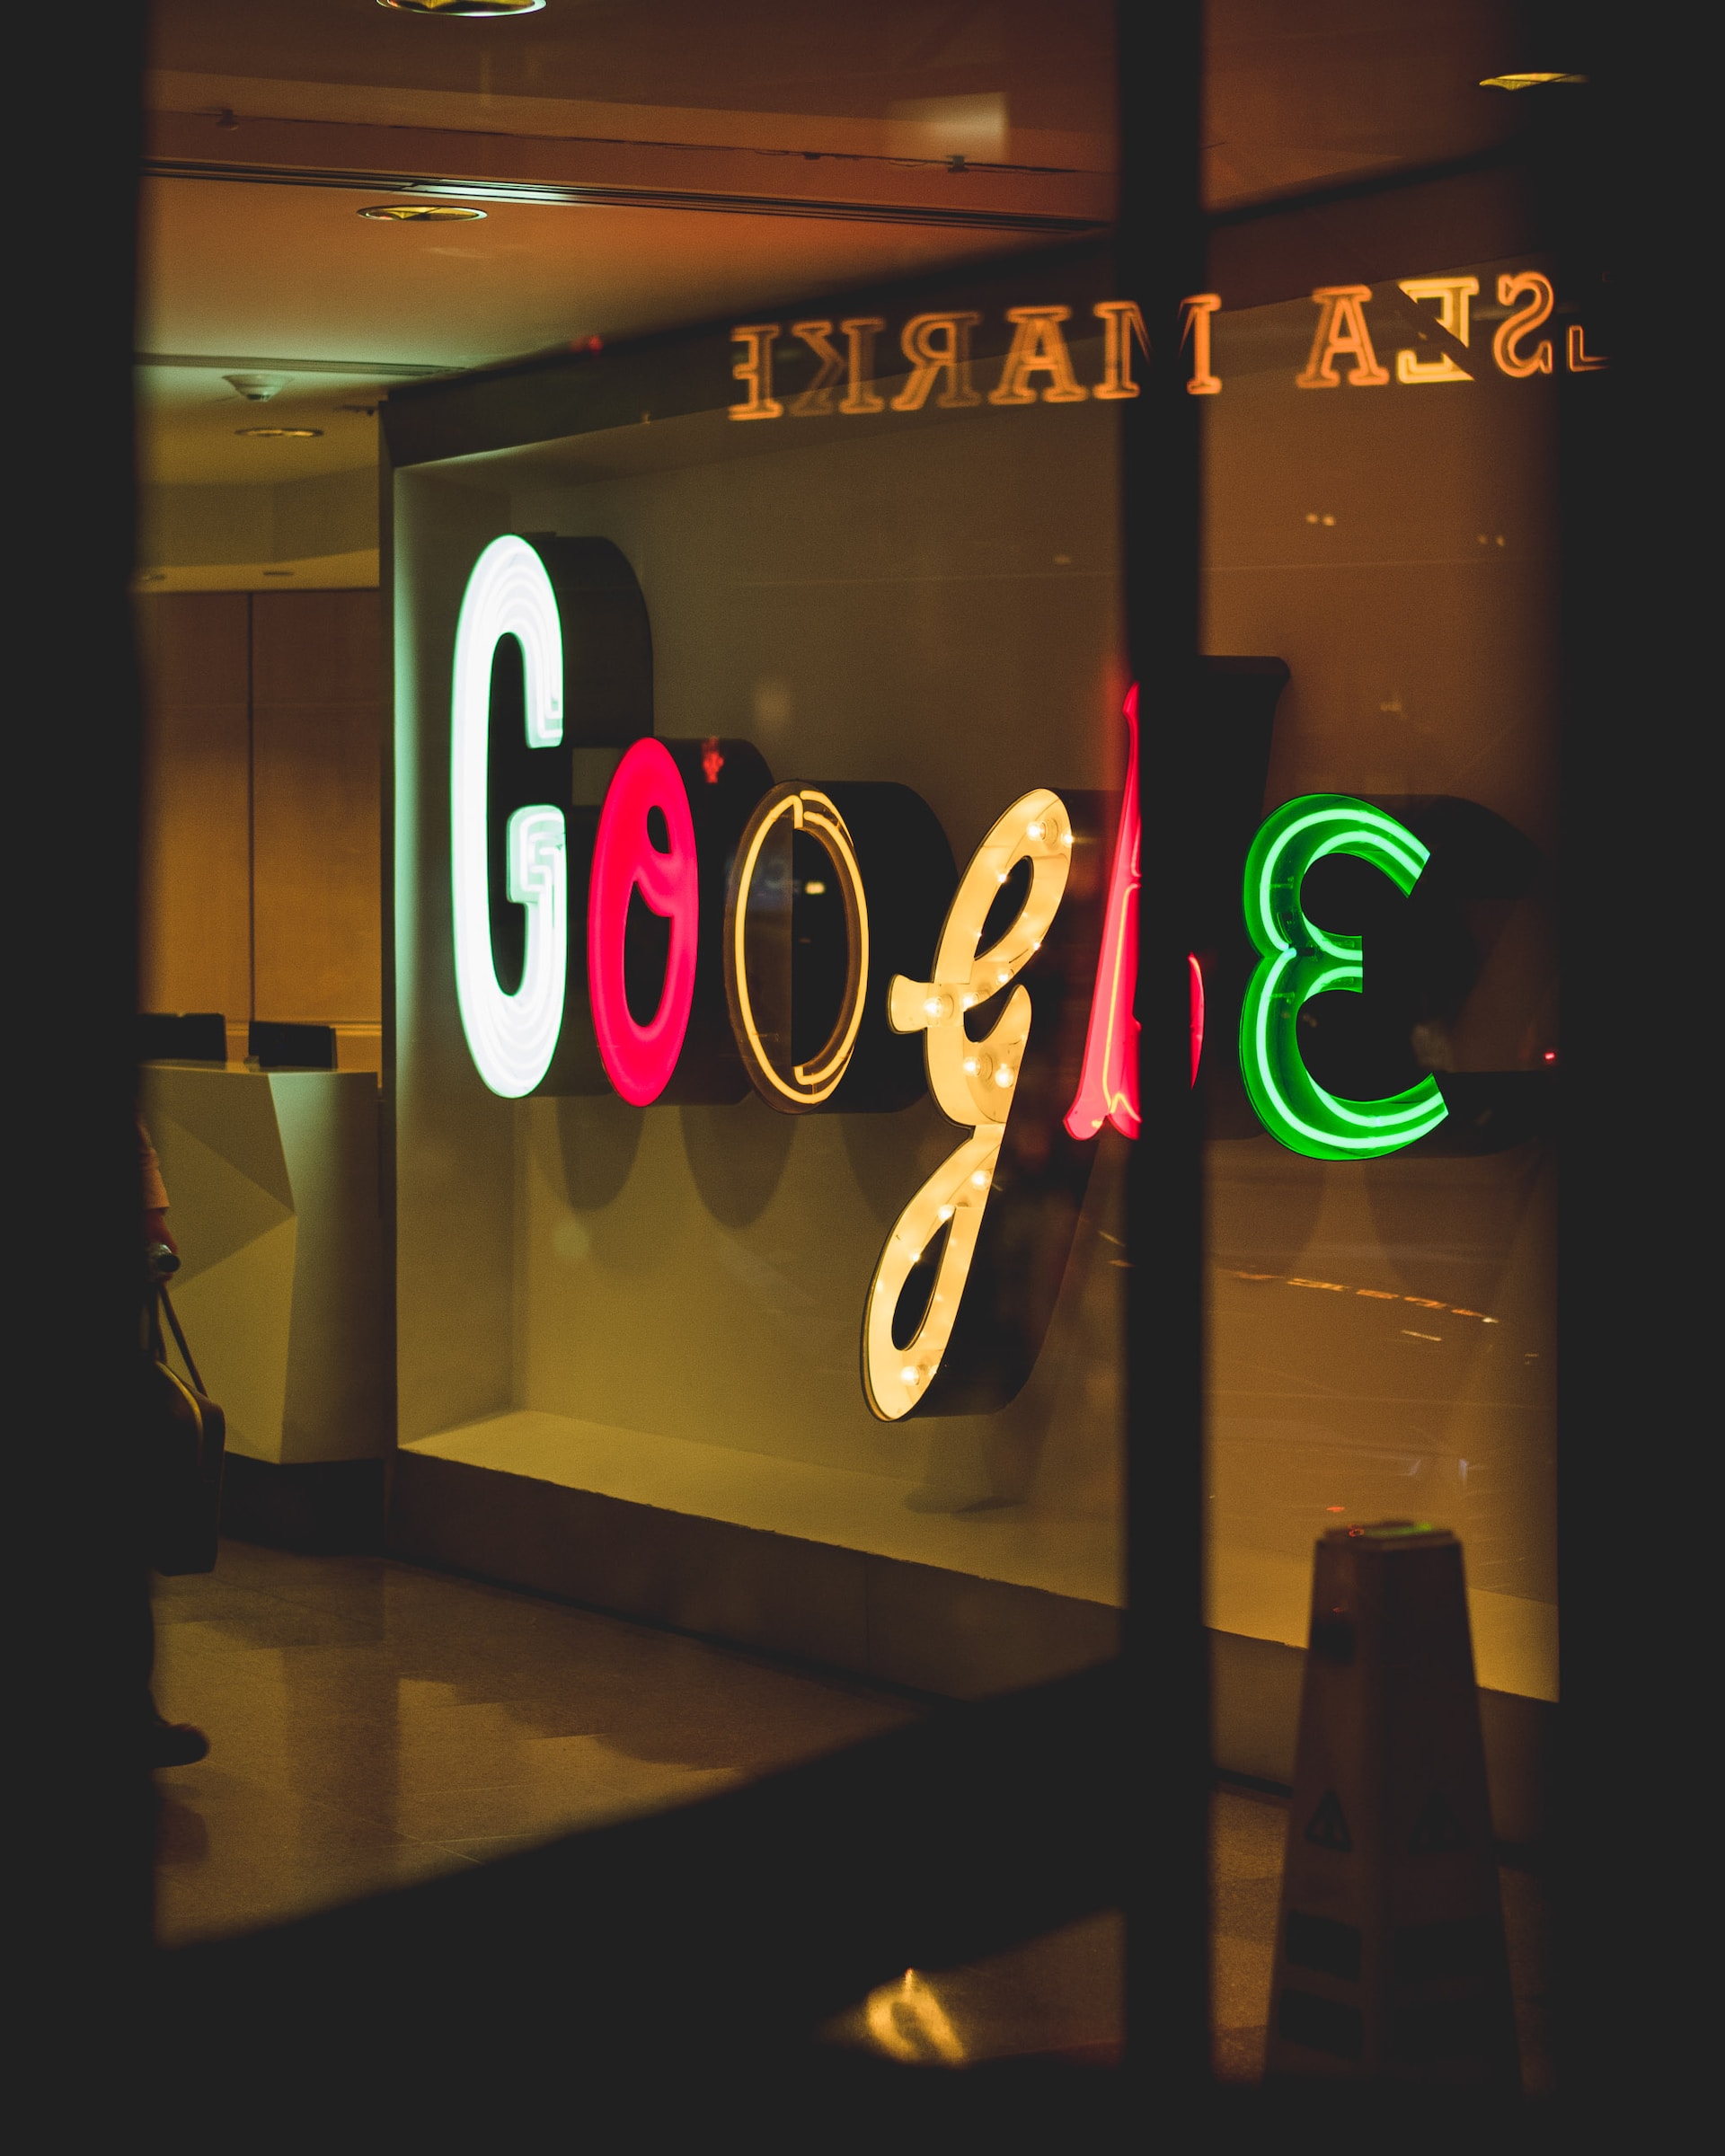 Google Cloud Introduces AML AI to Combat Money Laundering in Financial Institutions